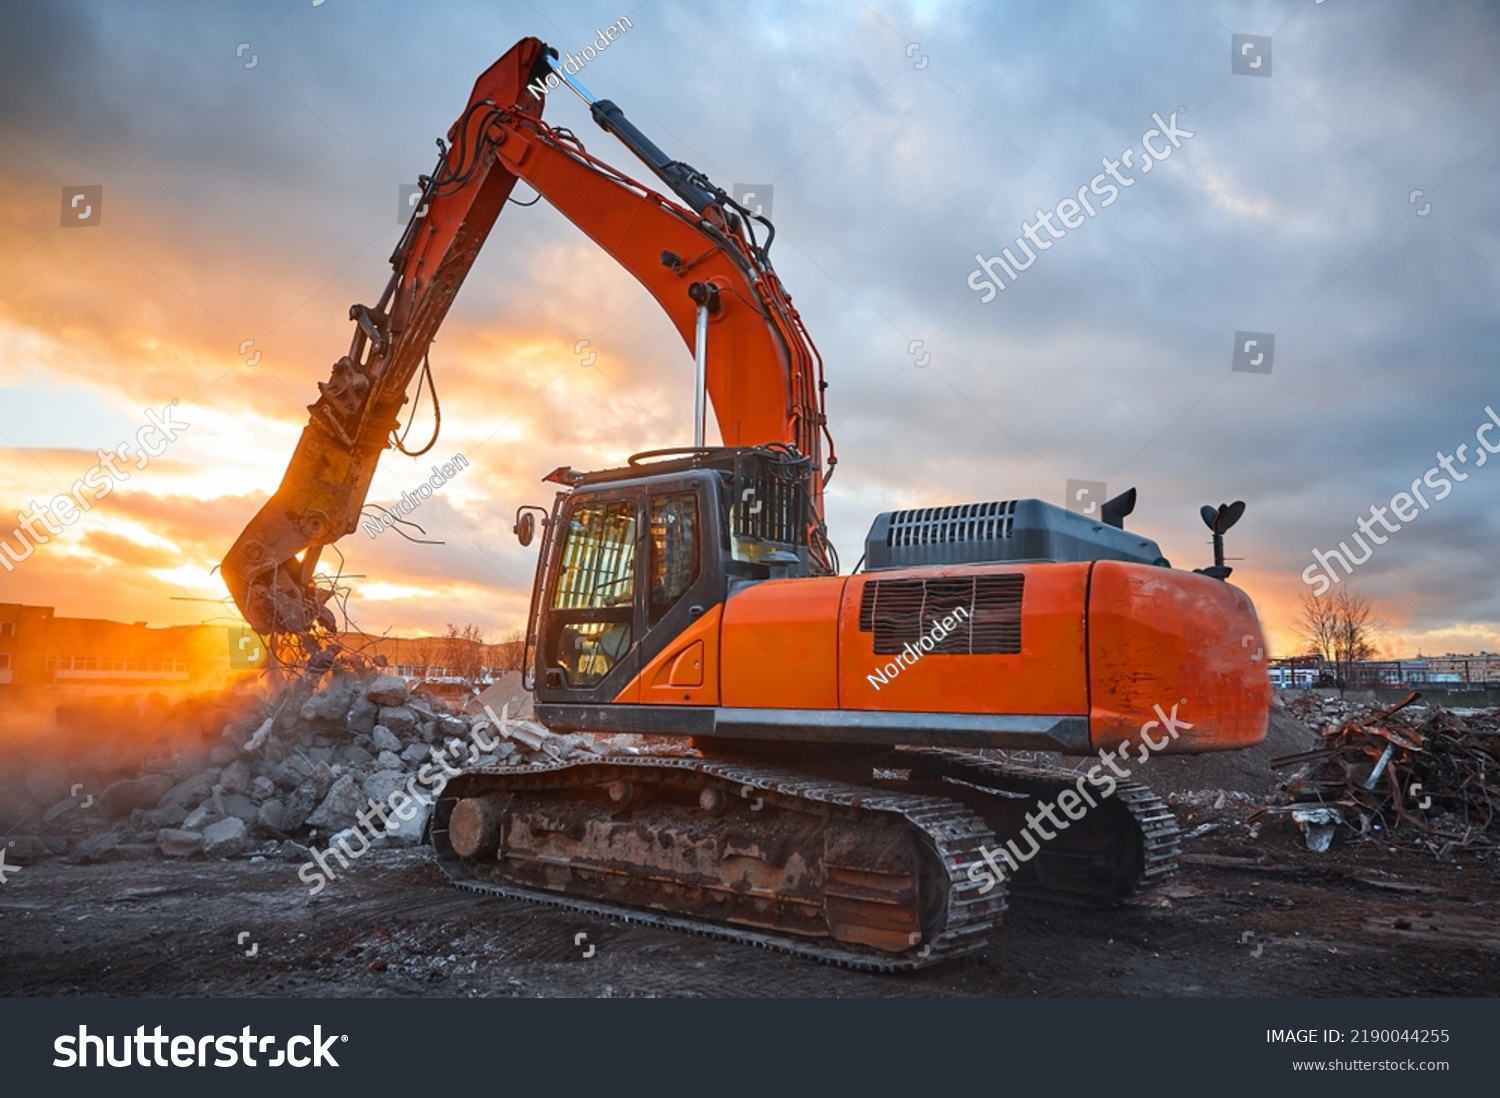 Excavator with concrete crusher on rig at demolition site #2190044255